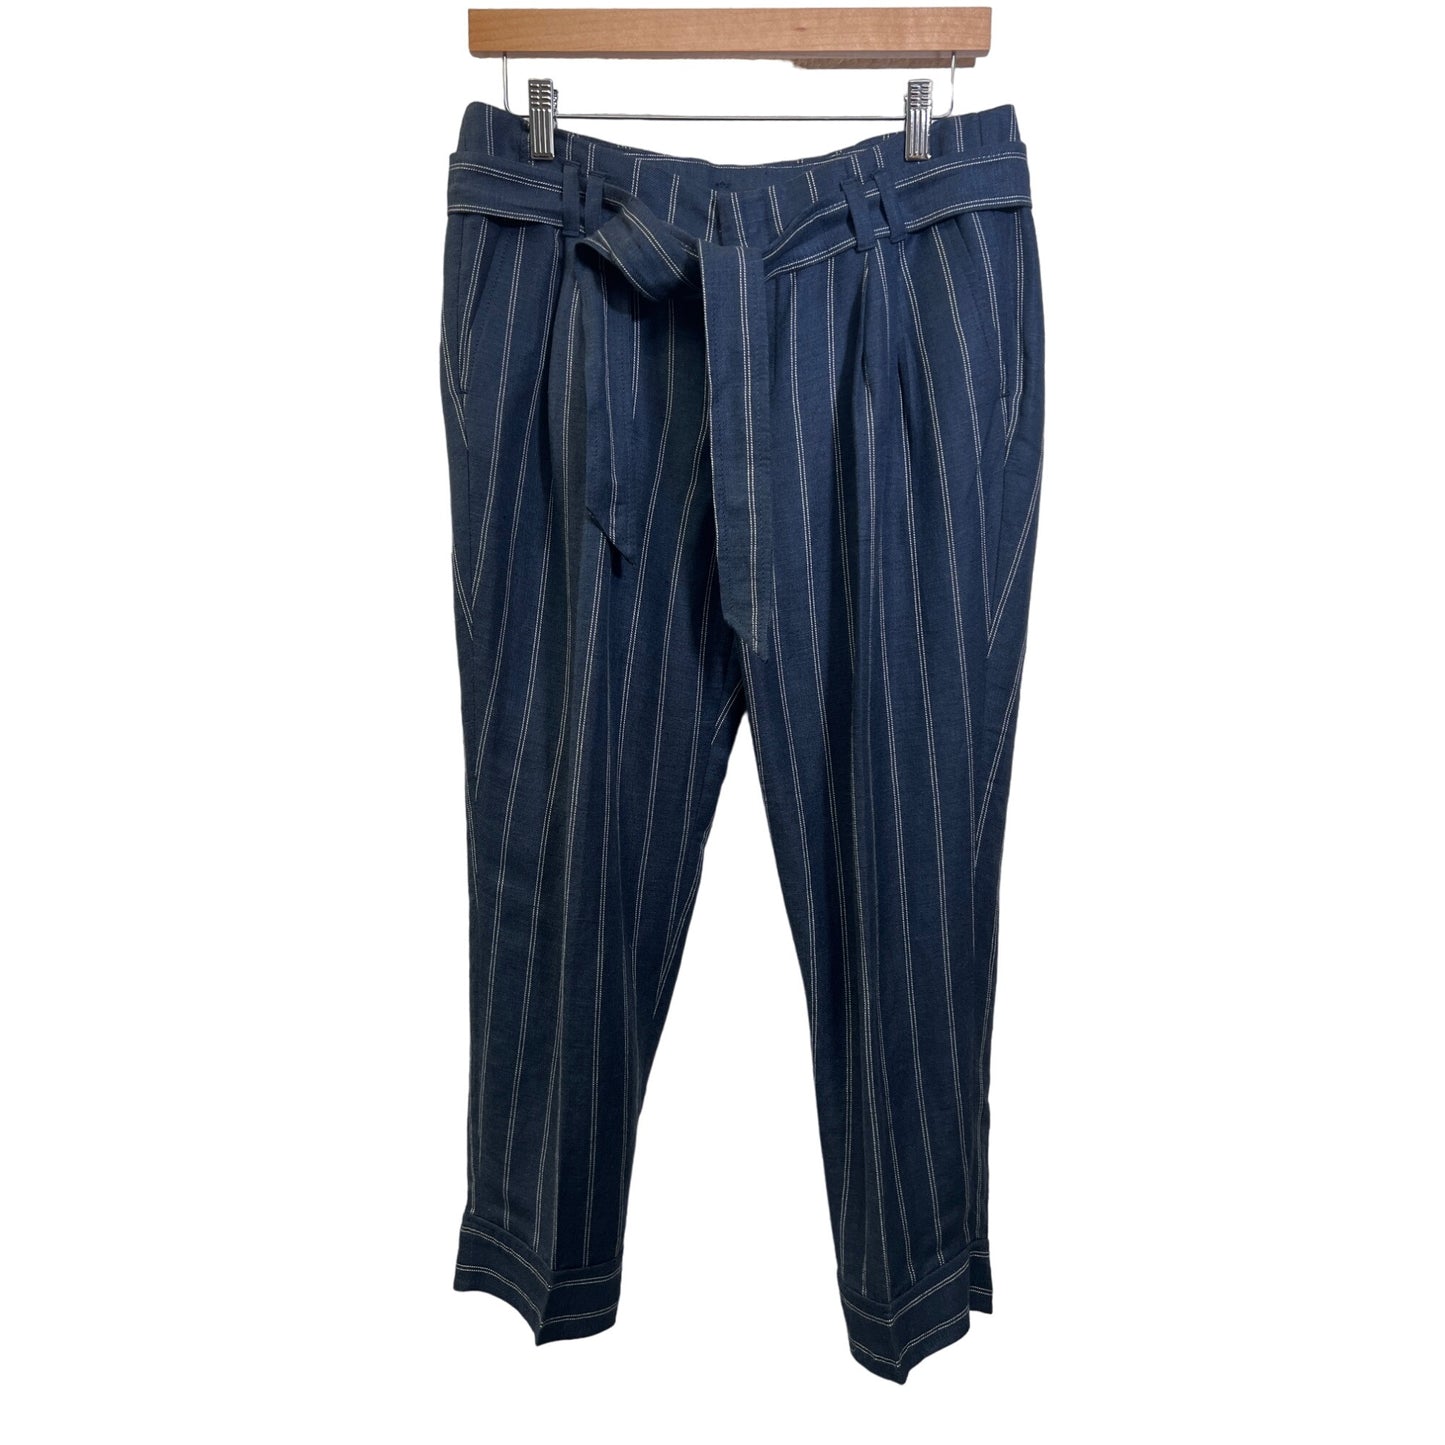 Banana Republic Avery Fit Blue and White Striped Belted Linen Pants